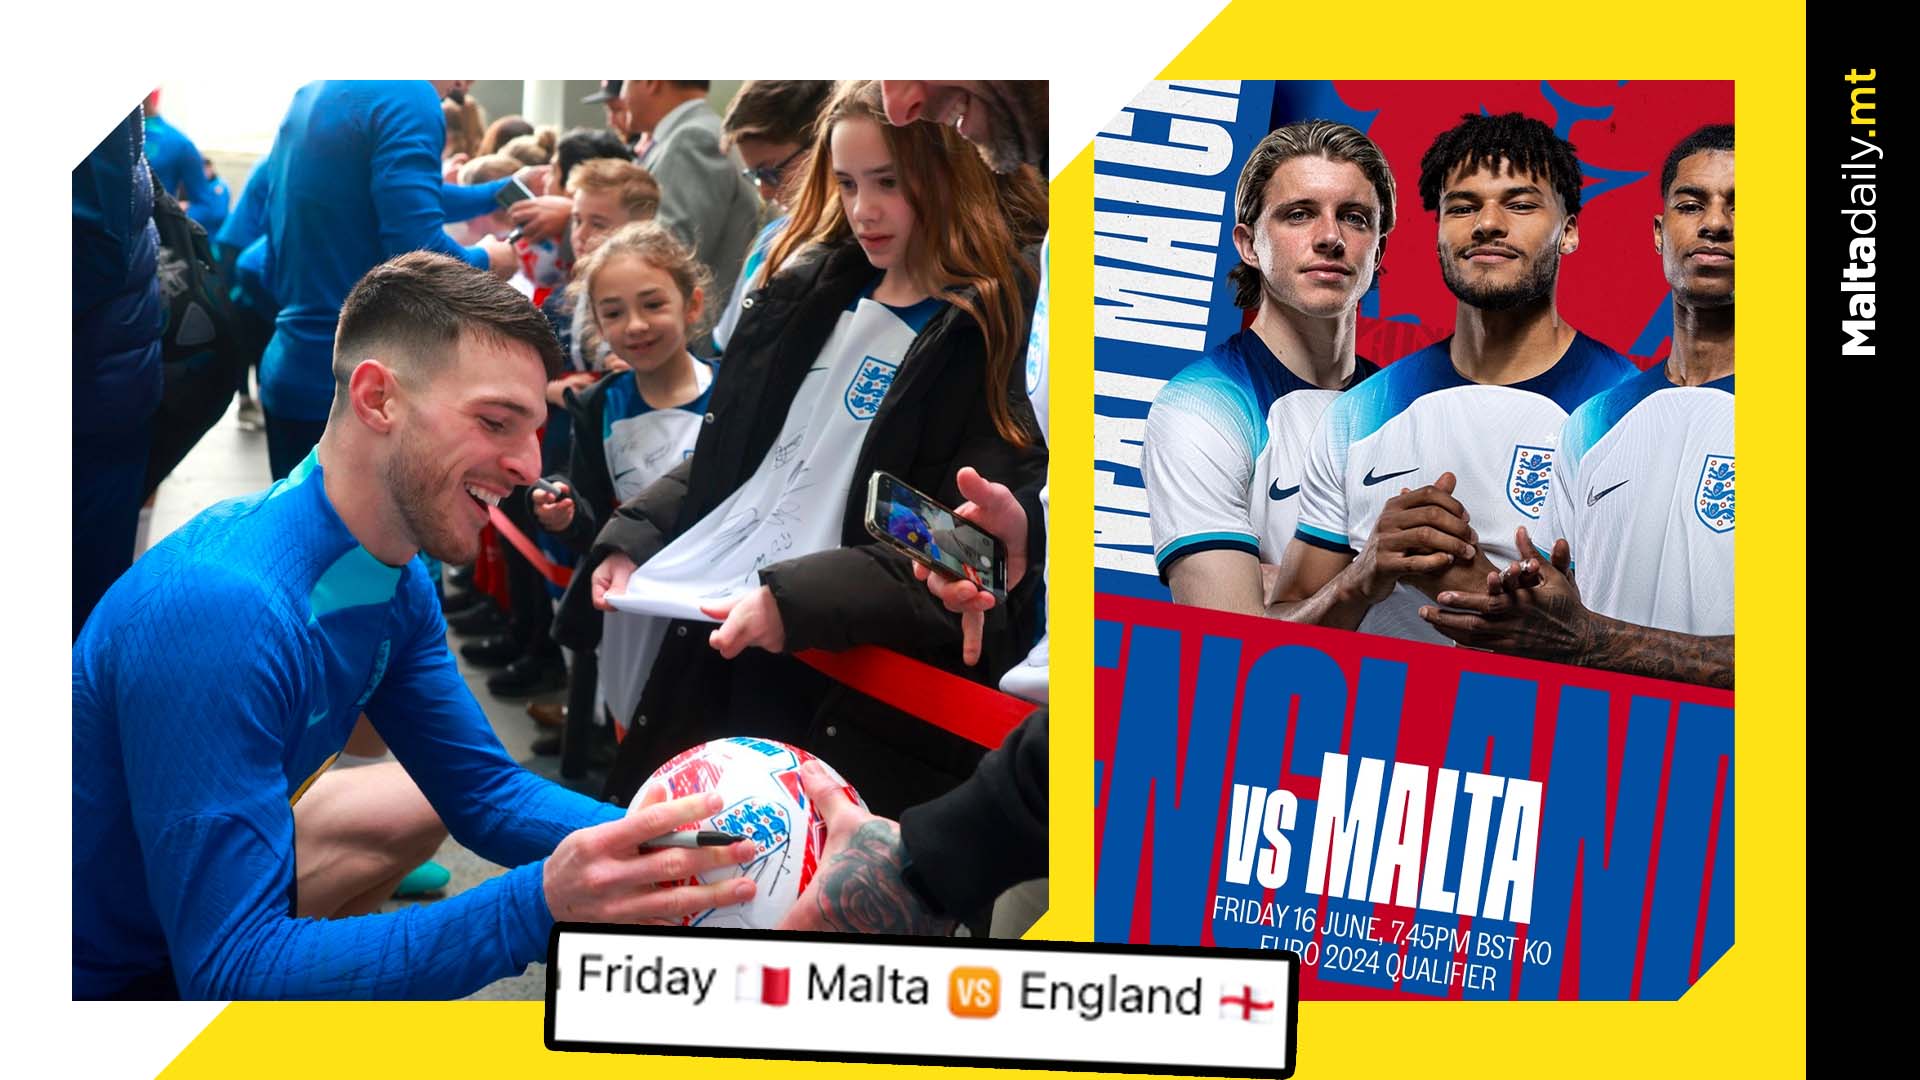 4,000 England Supporters In Malta For Friday Match